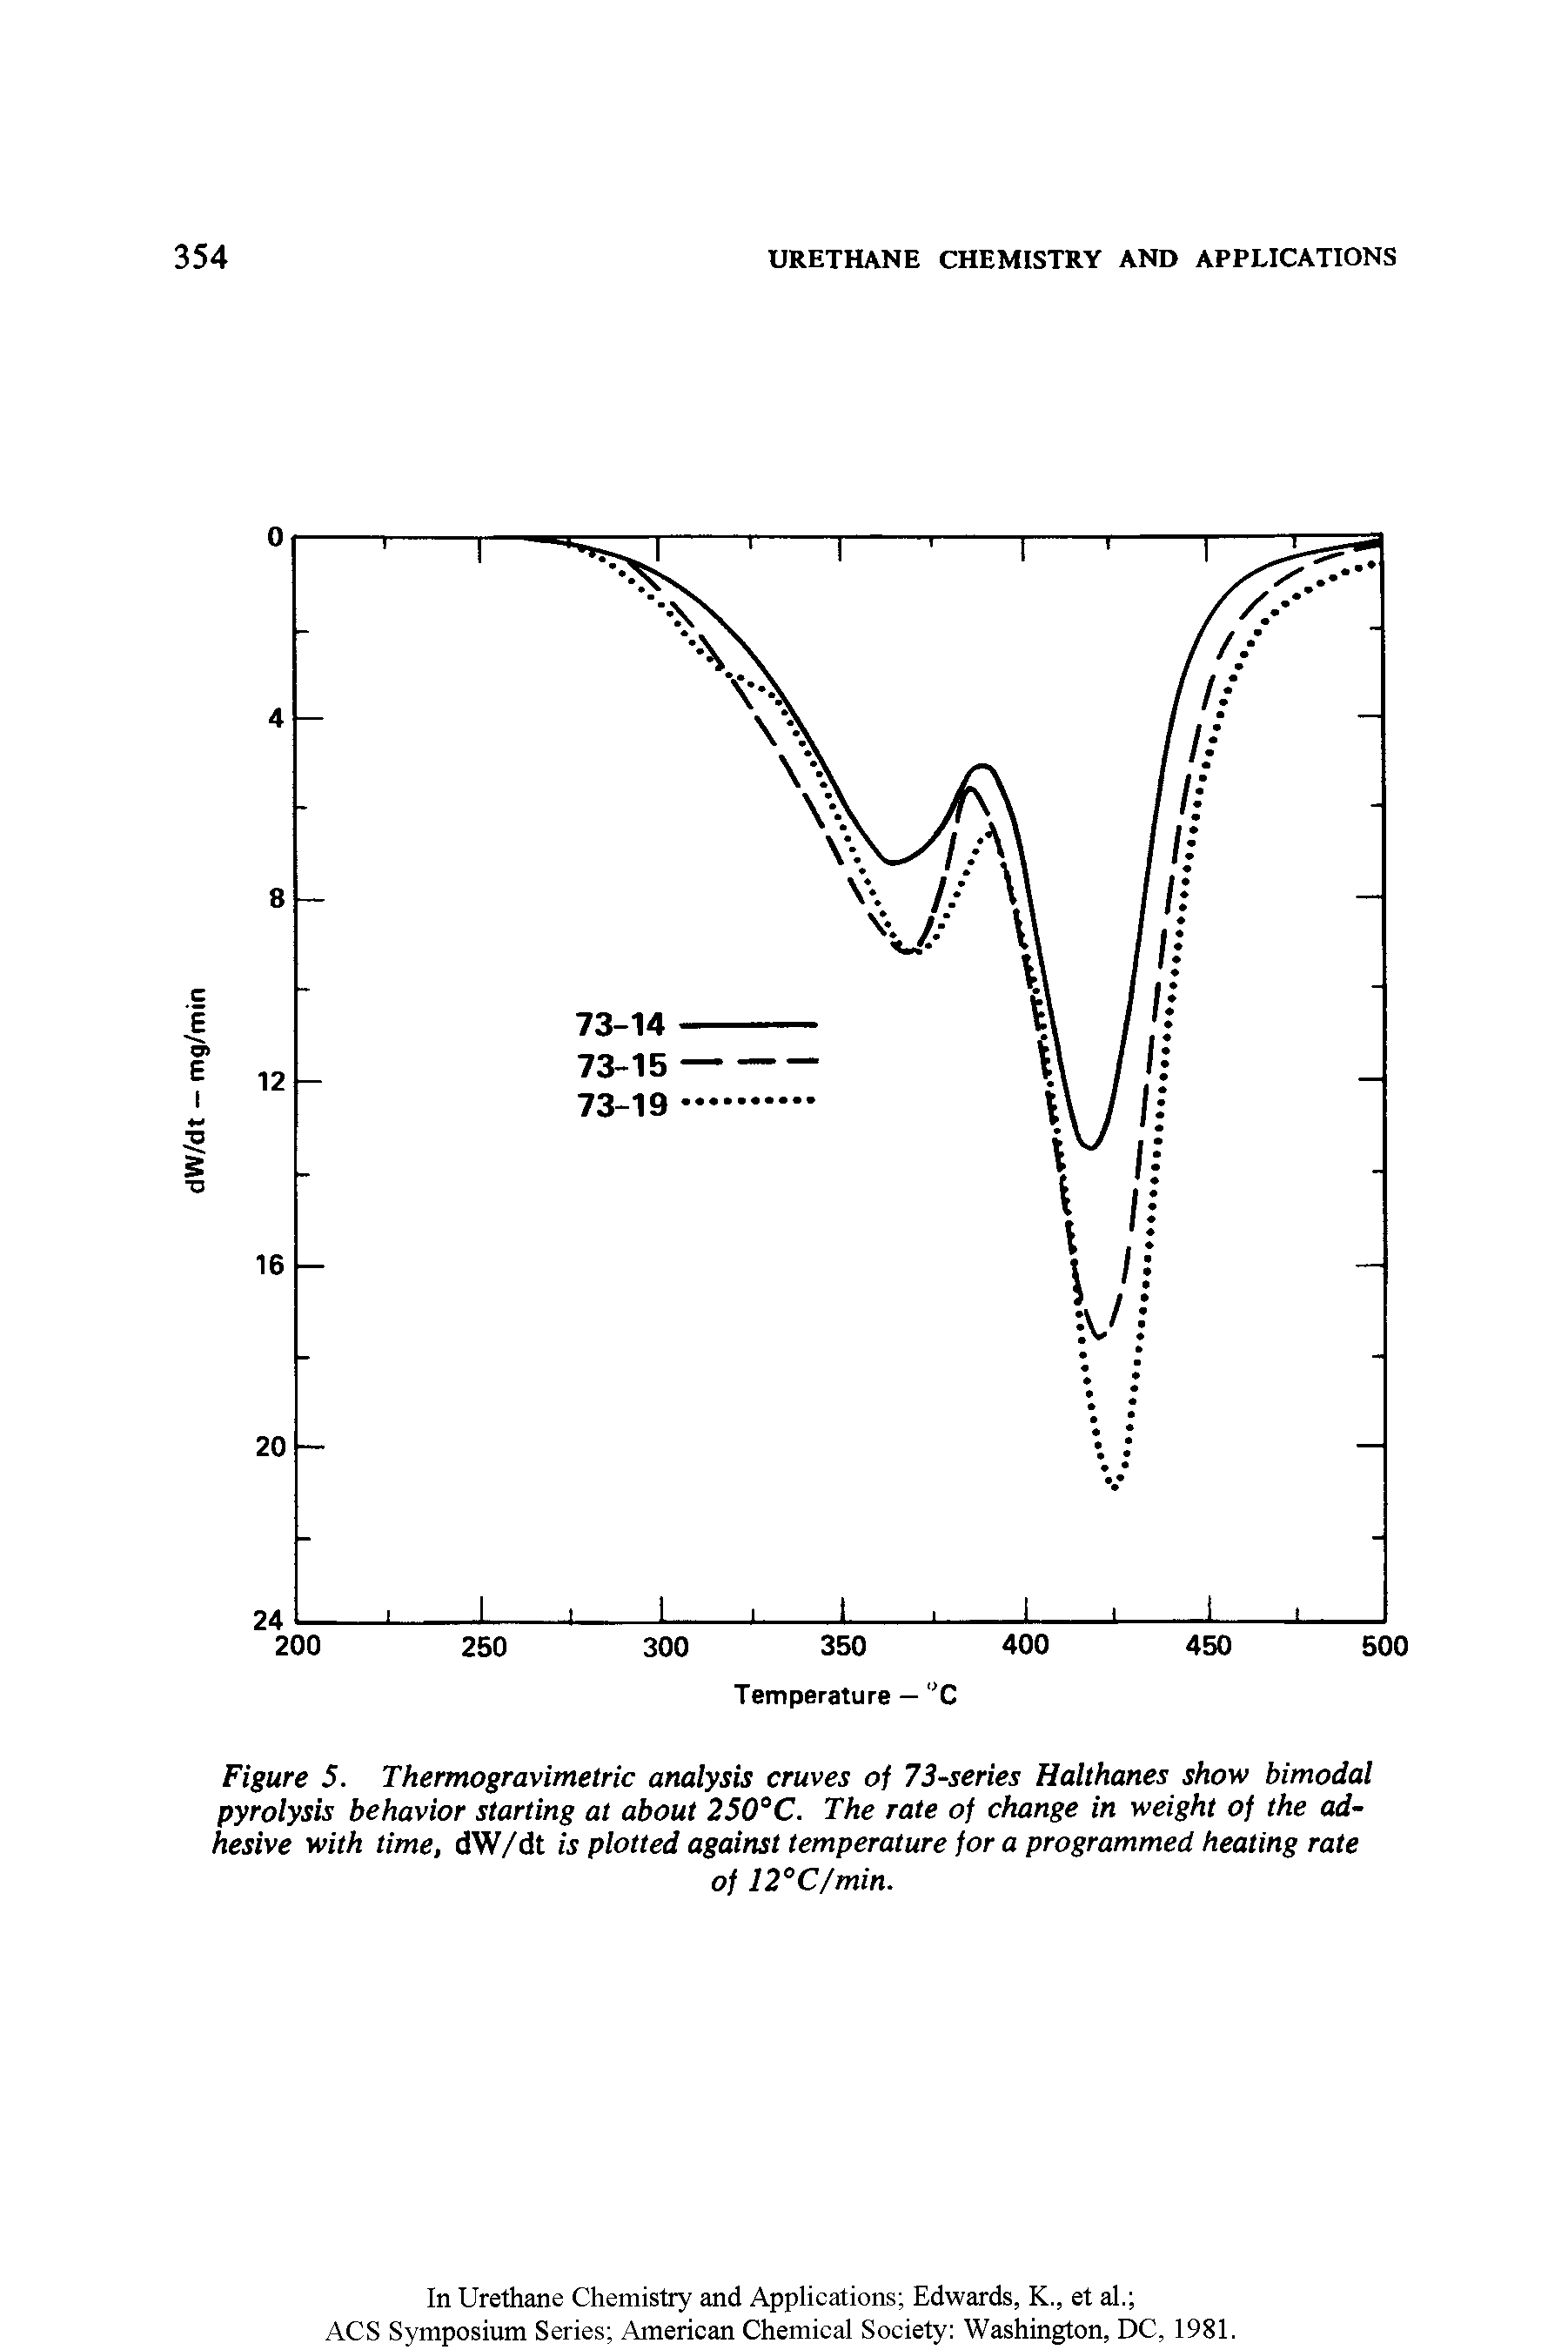 Figure 5. Thermogravimetric analysis cruves of 73-series Halthanes show bimodal pyrolysis behavior starting at about 250°C. The rate of change in weight of the adhesive with time, dW/dt is plotted against temperature for a programmed heating rate...